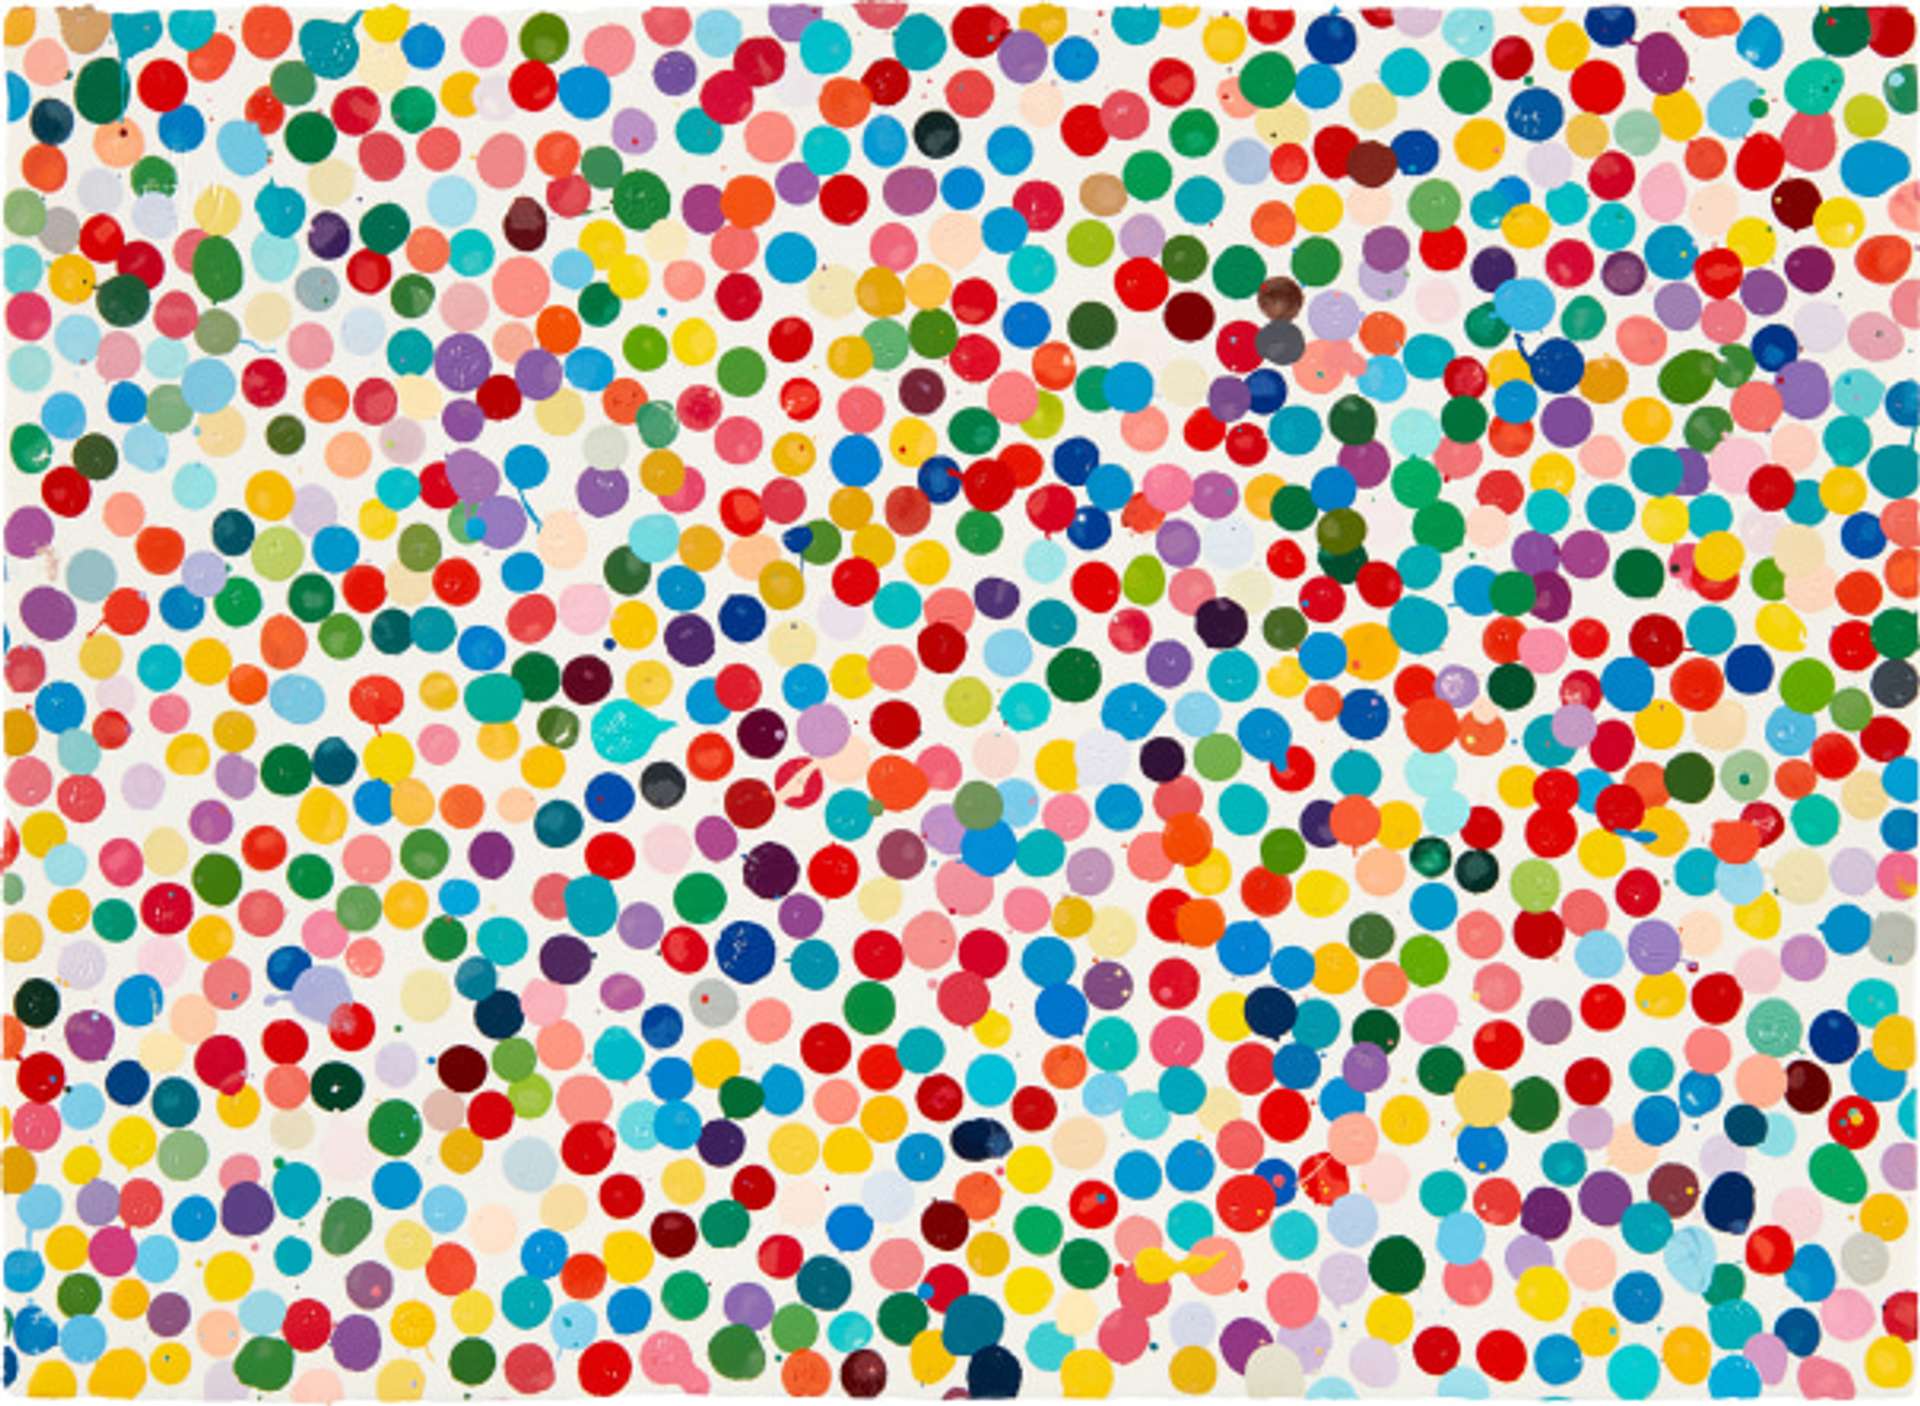 The Currency by Damien Hirst